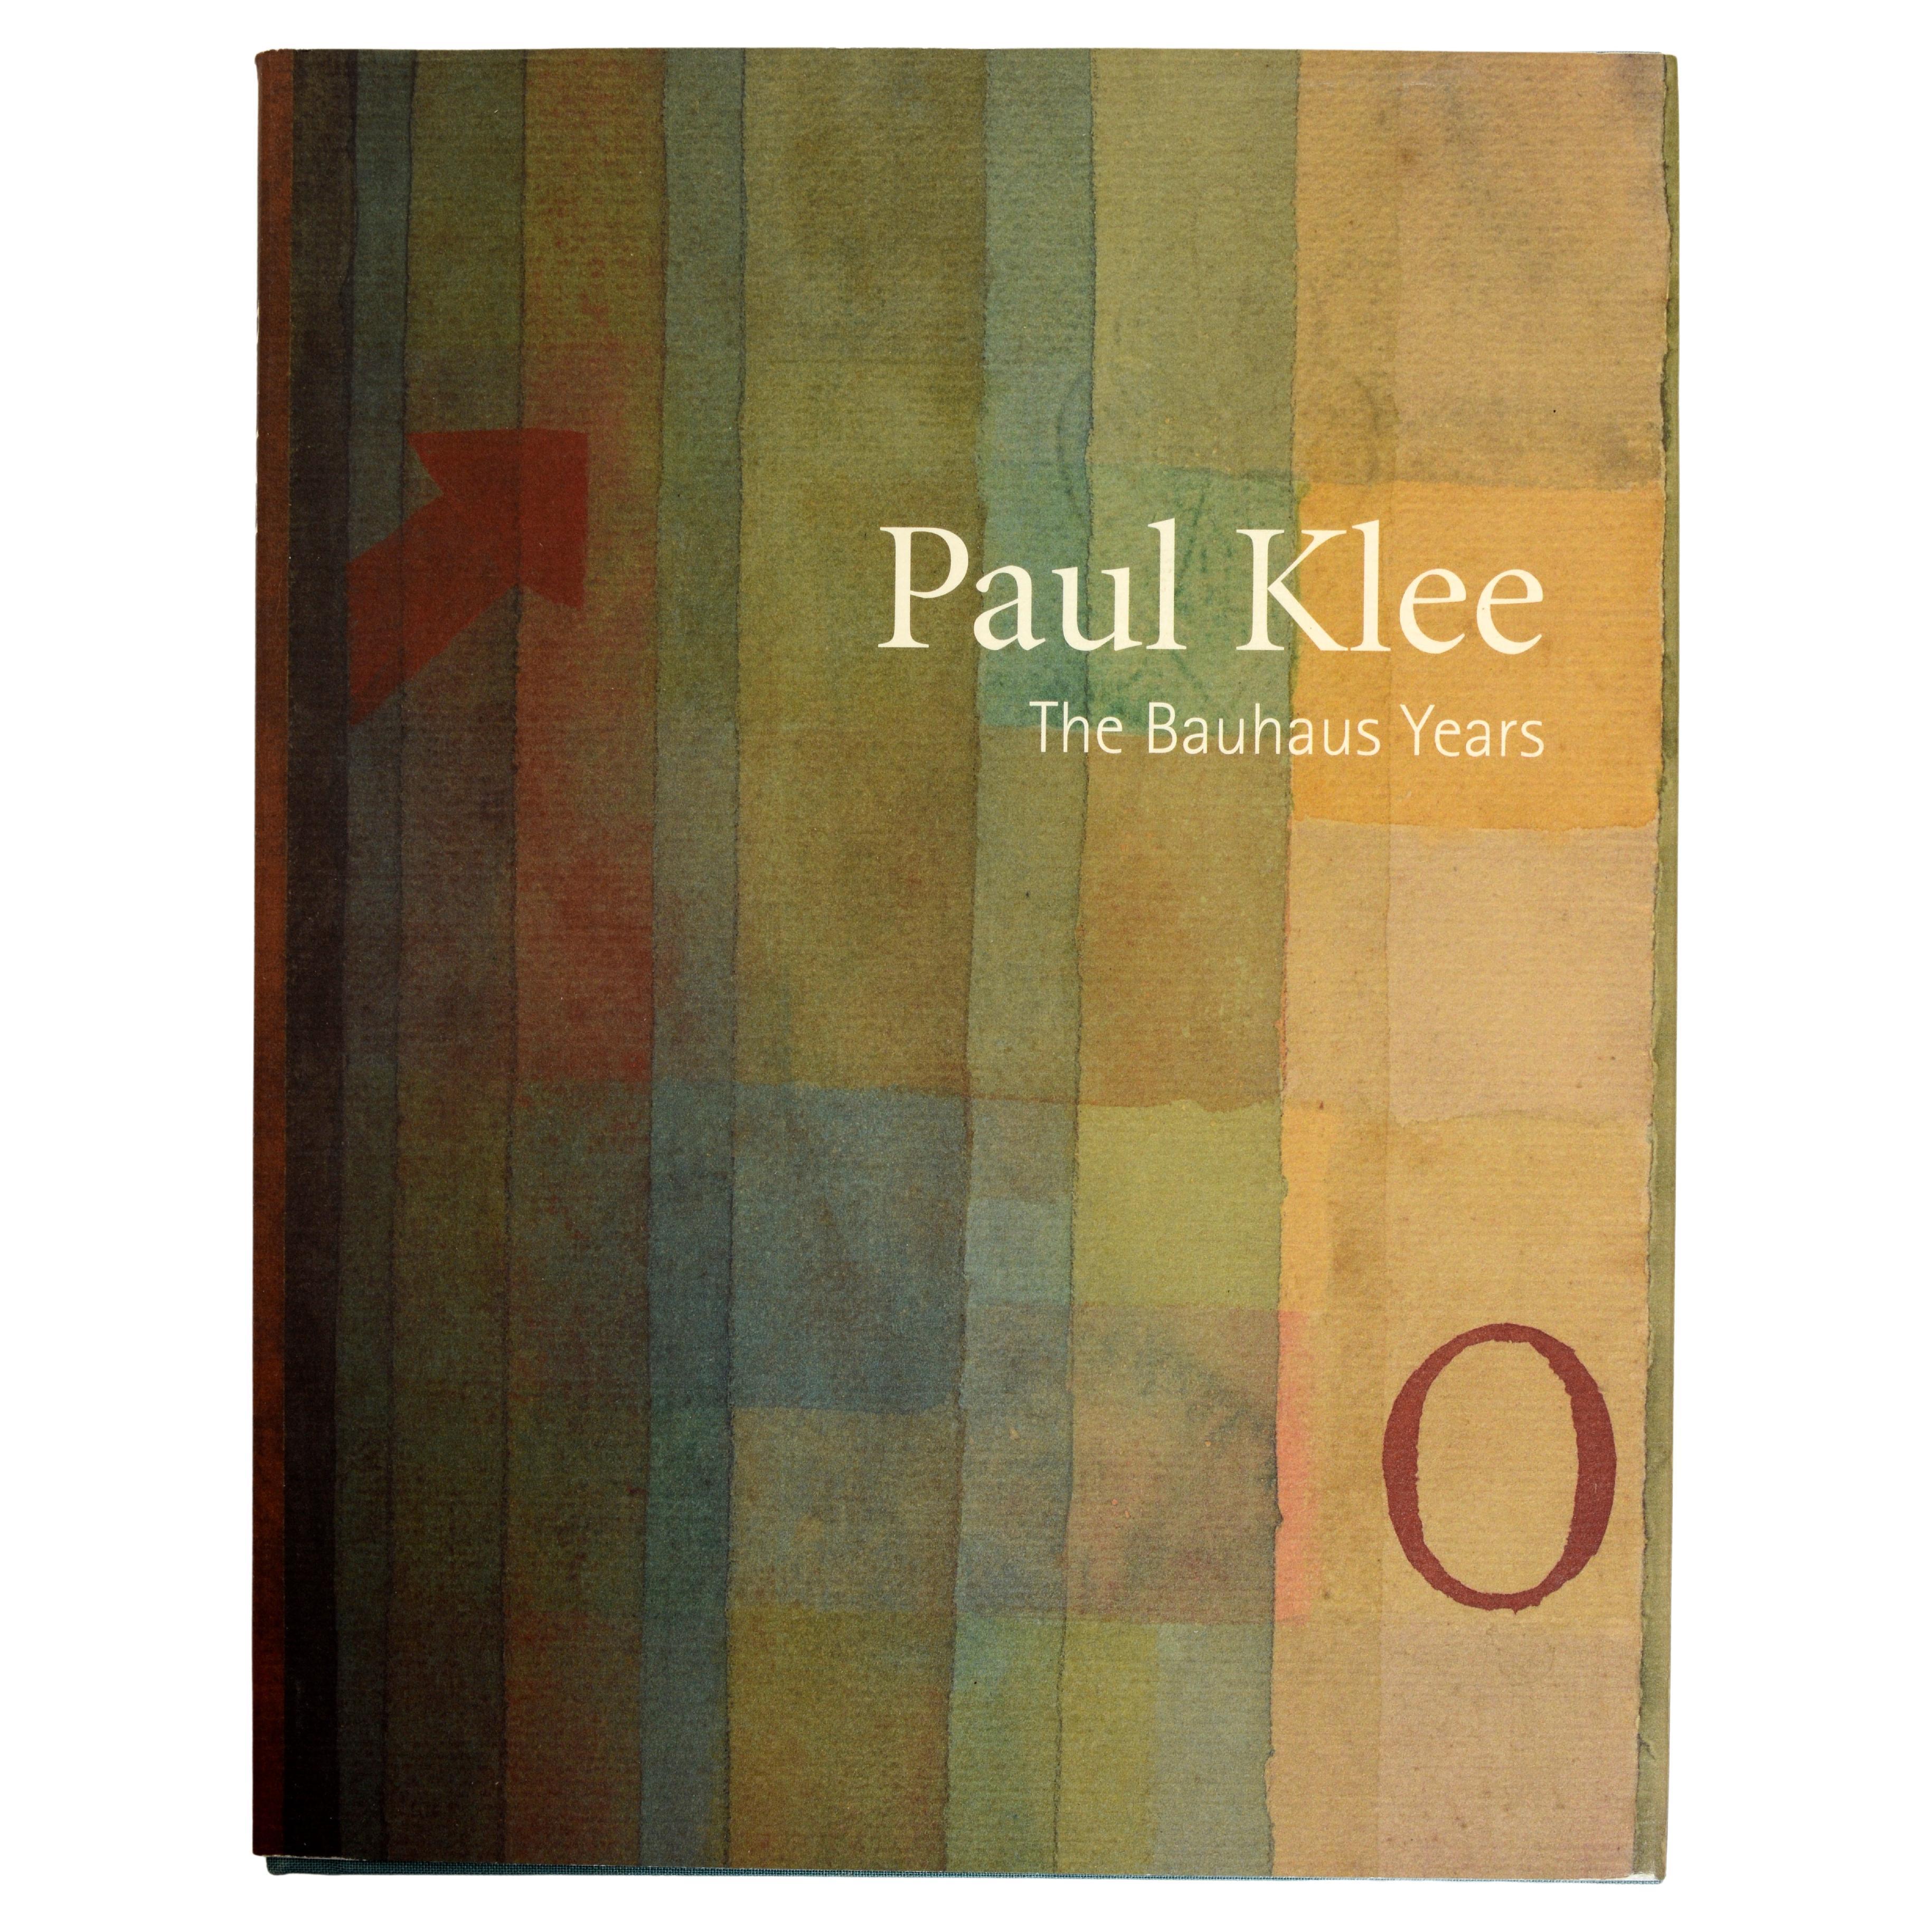 Paul Klee The Bauhaus Years by Sabine Rewald 1st Ed Exhibition Catalog